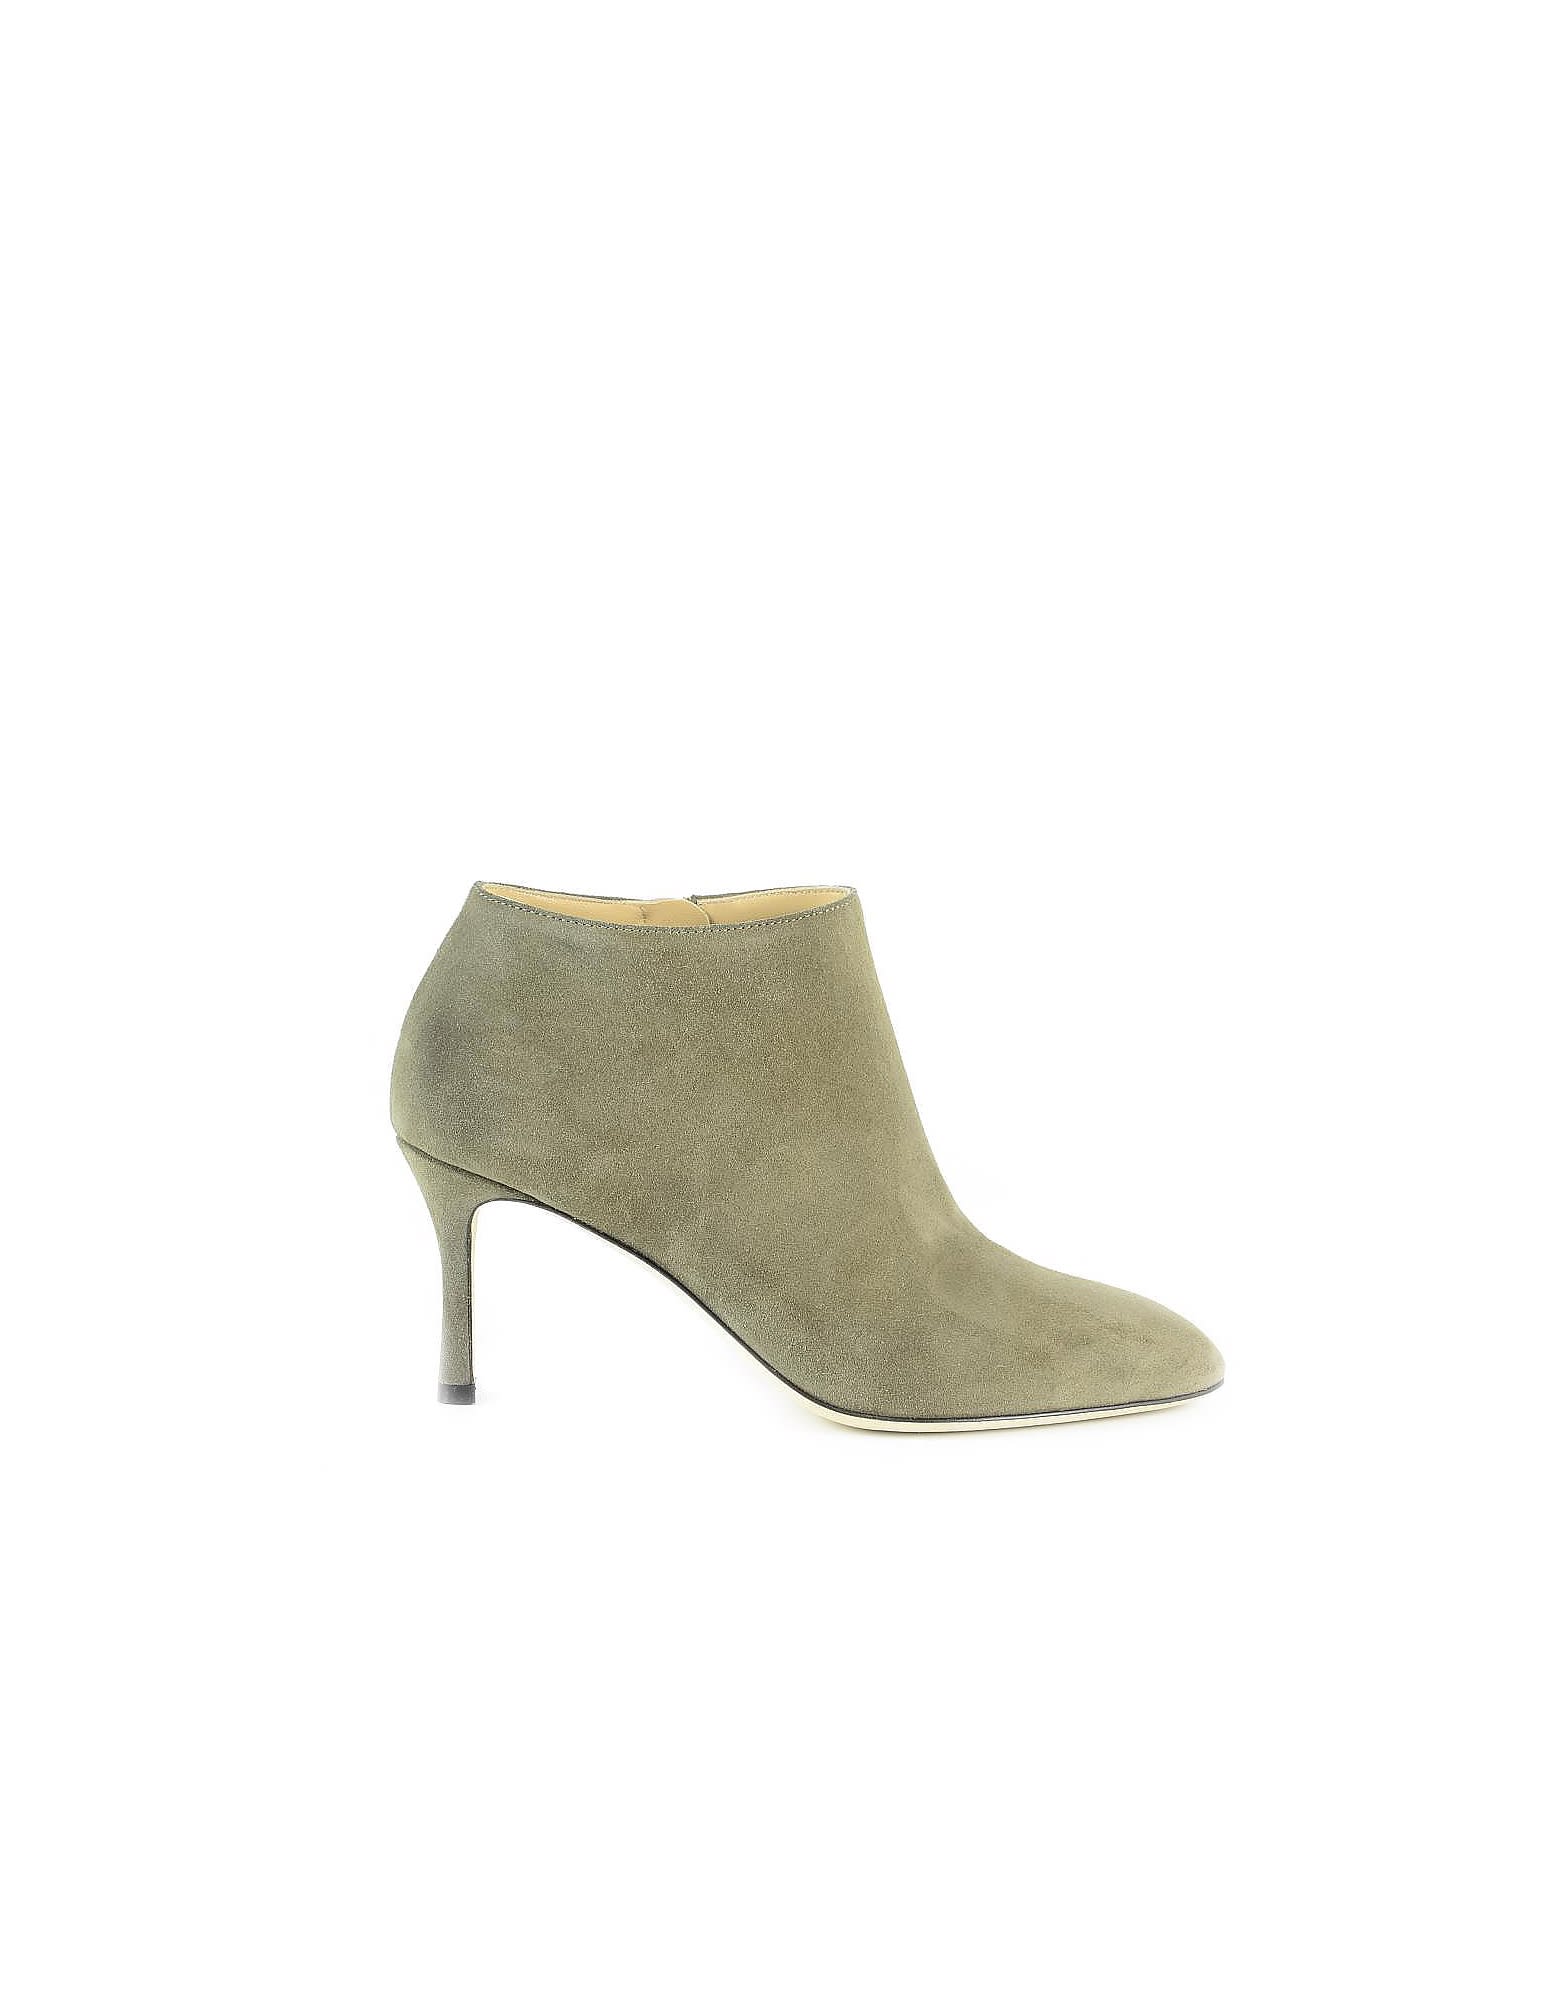 Sergio Rossi Taupe Suede Booties W/high Heel